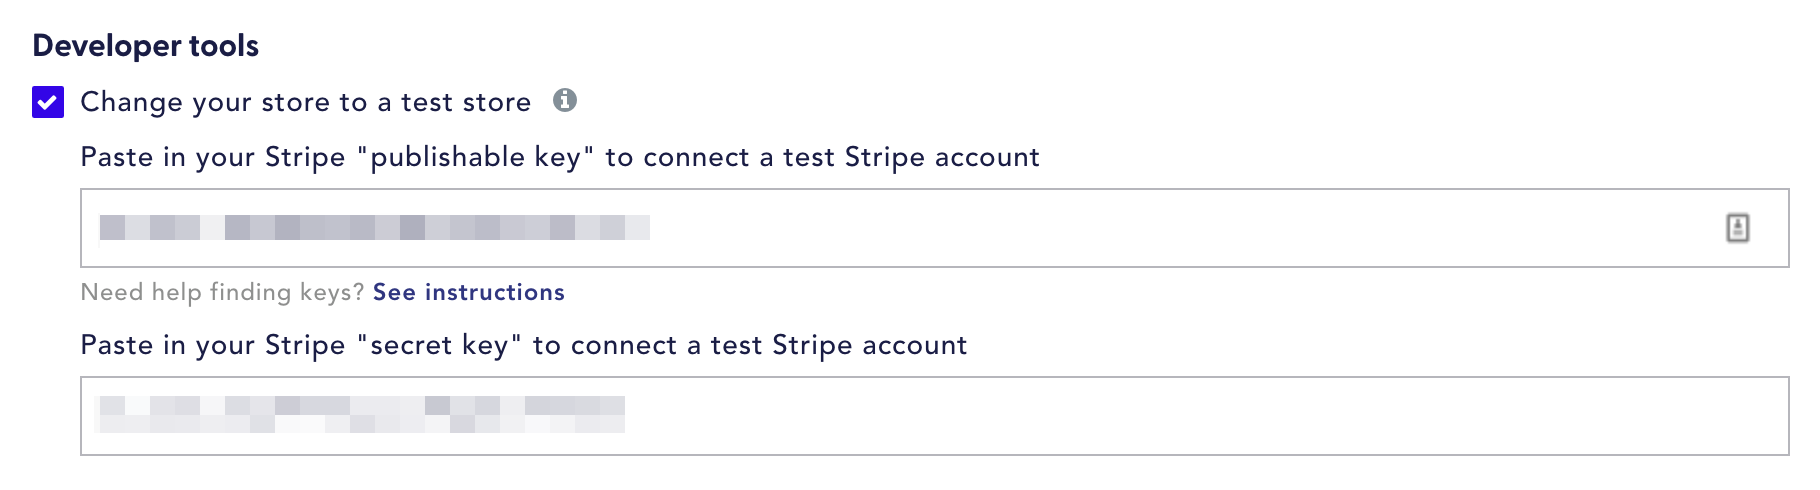 Stripe_developer_account_in_Recharge.png